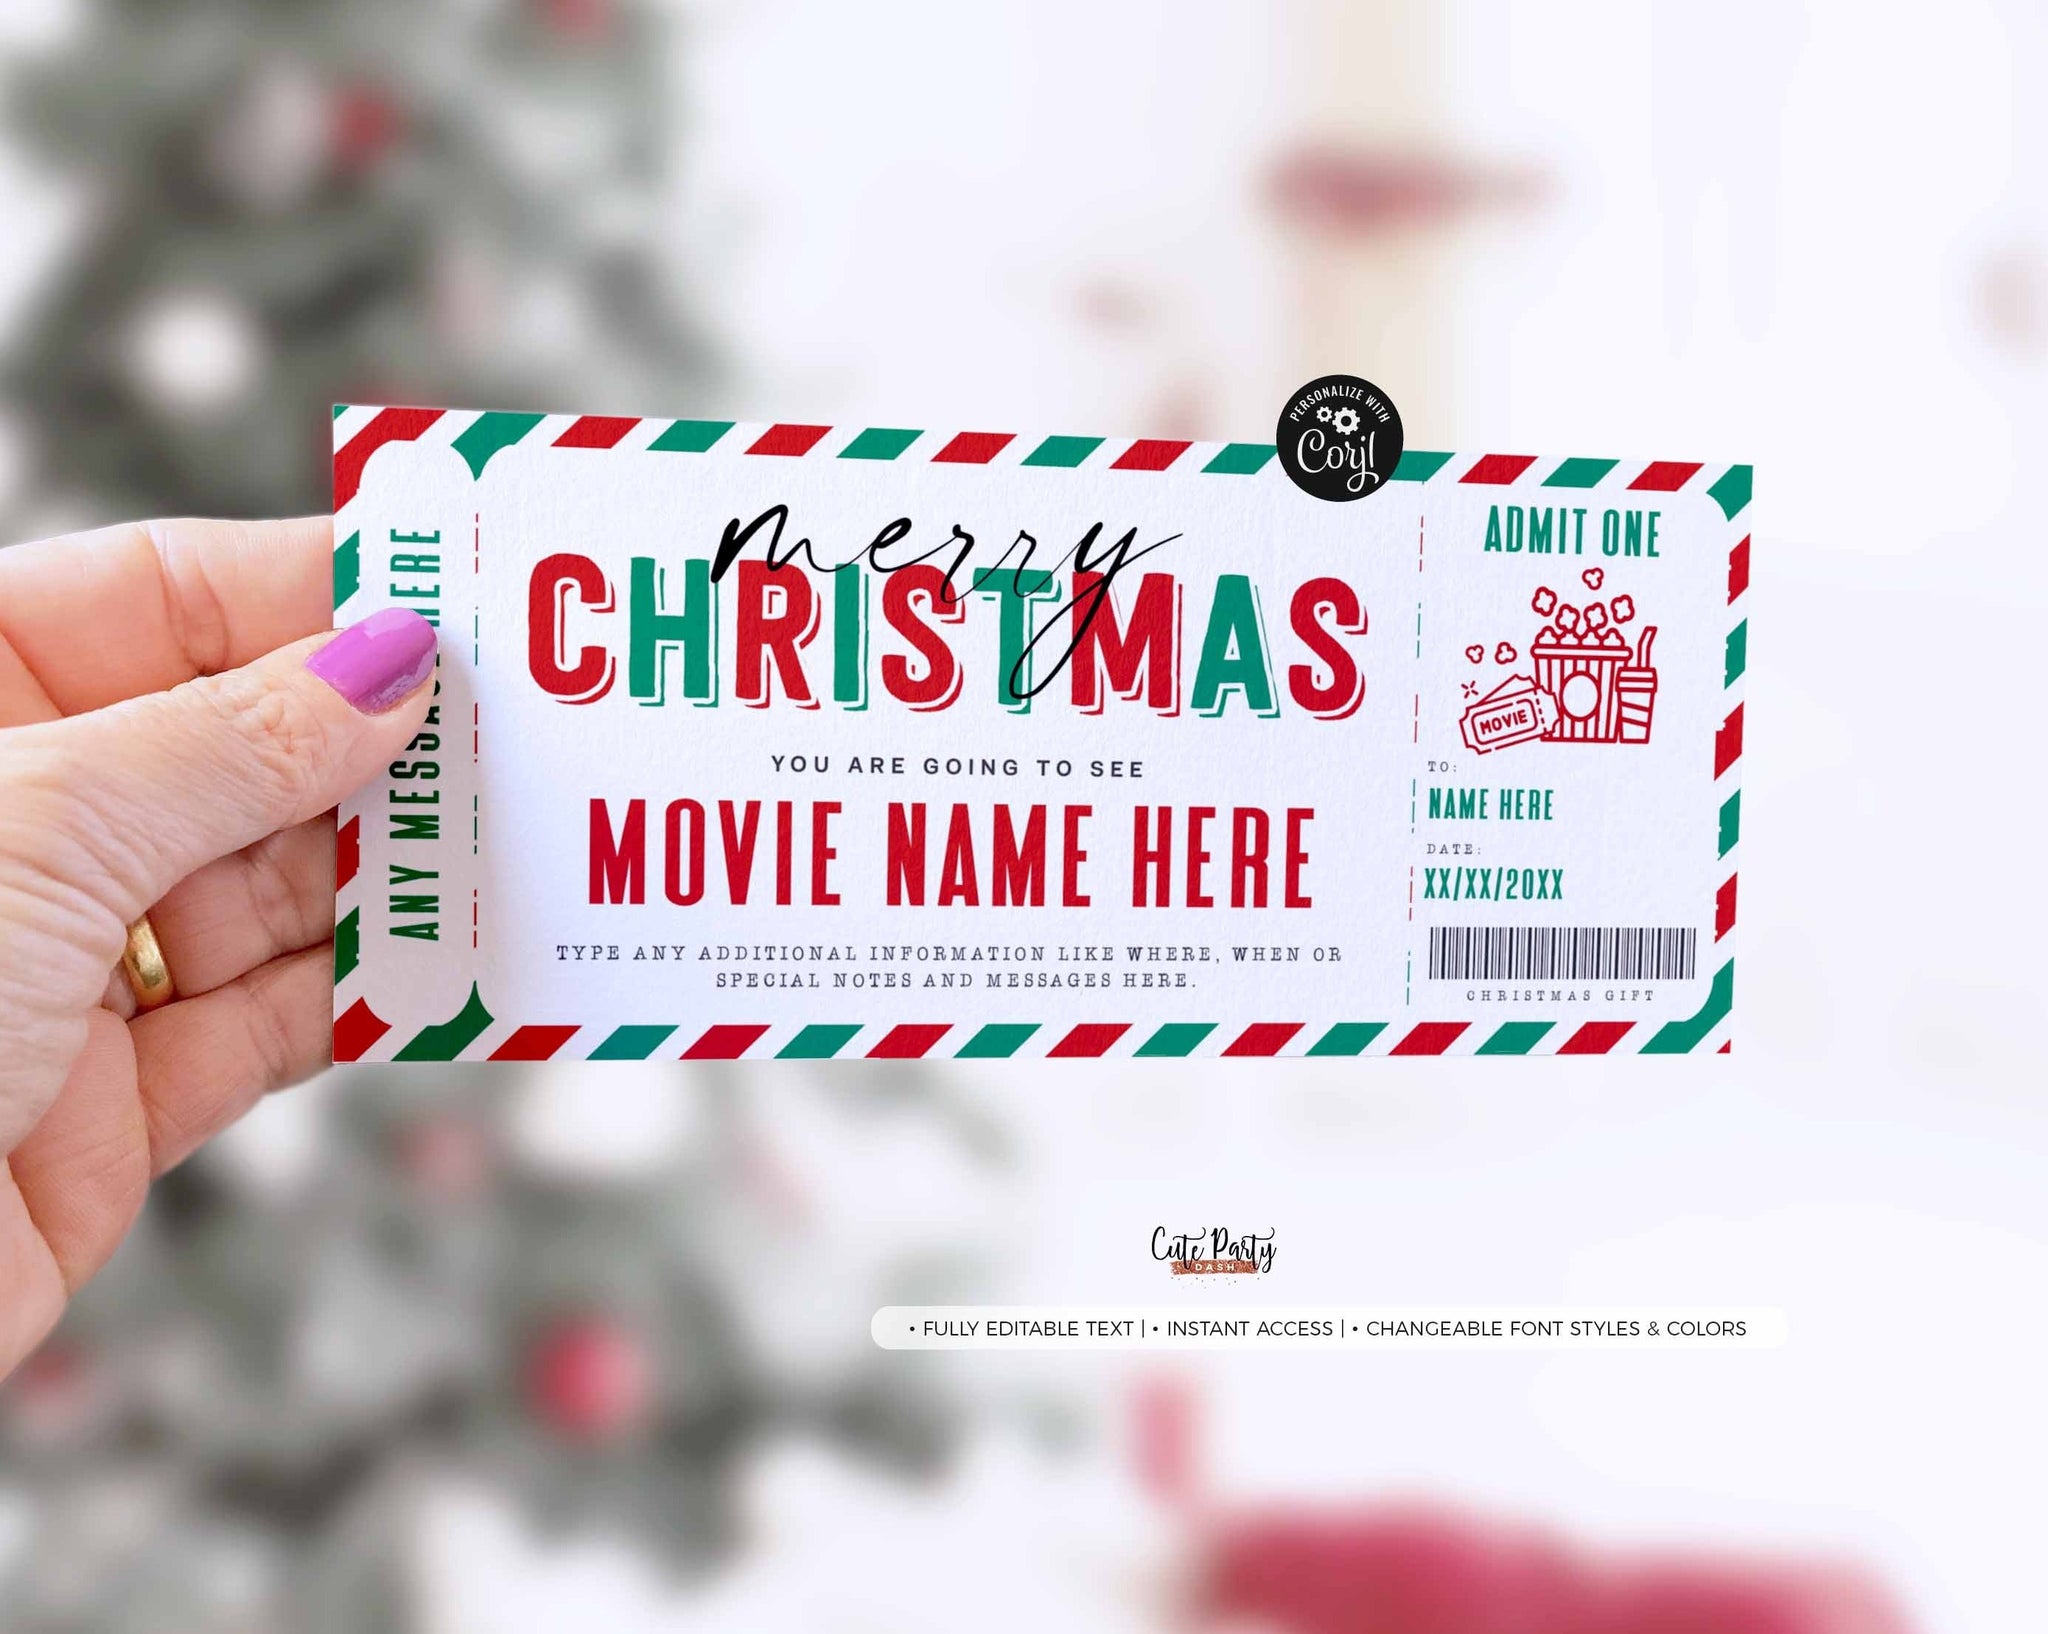 9+ Attractive Raffle and Movie Ticket Templates - PSD, AI, Word